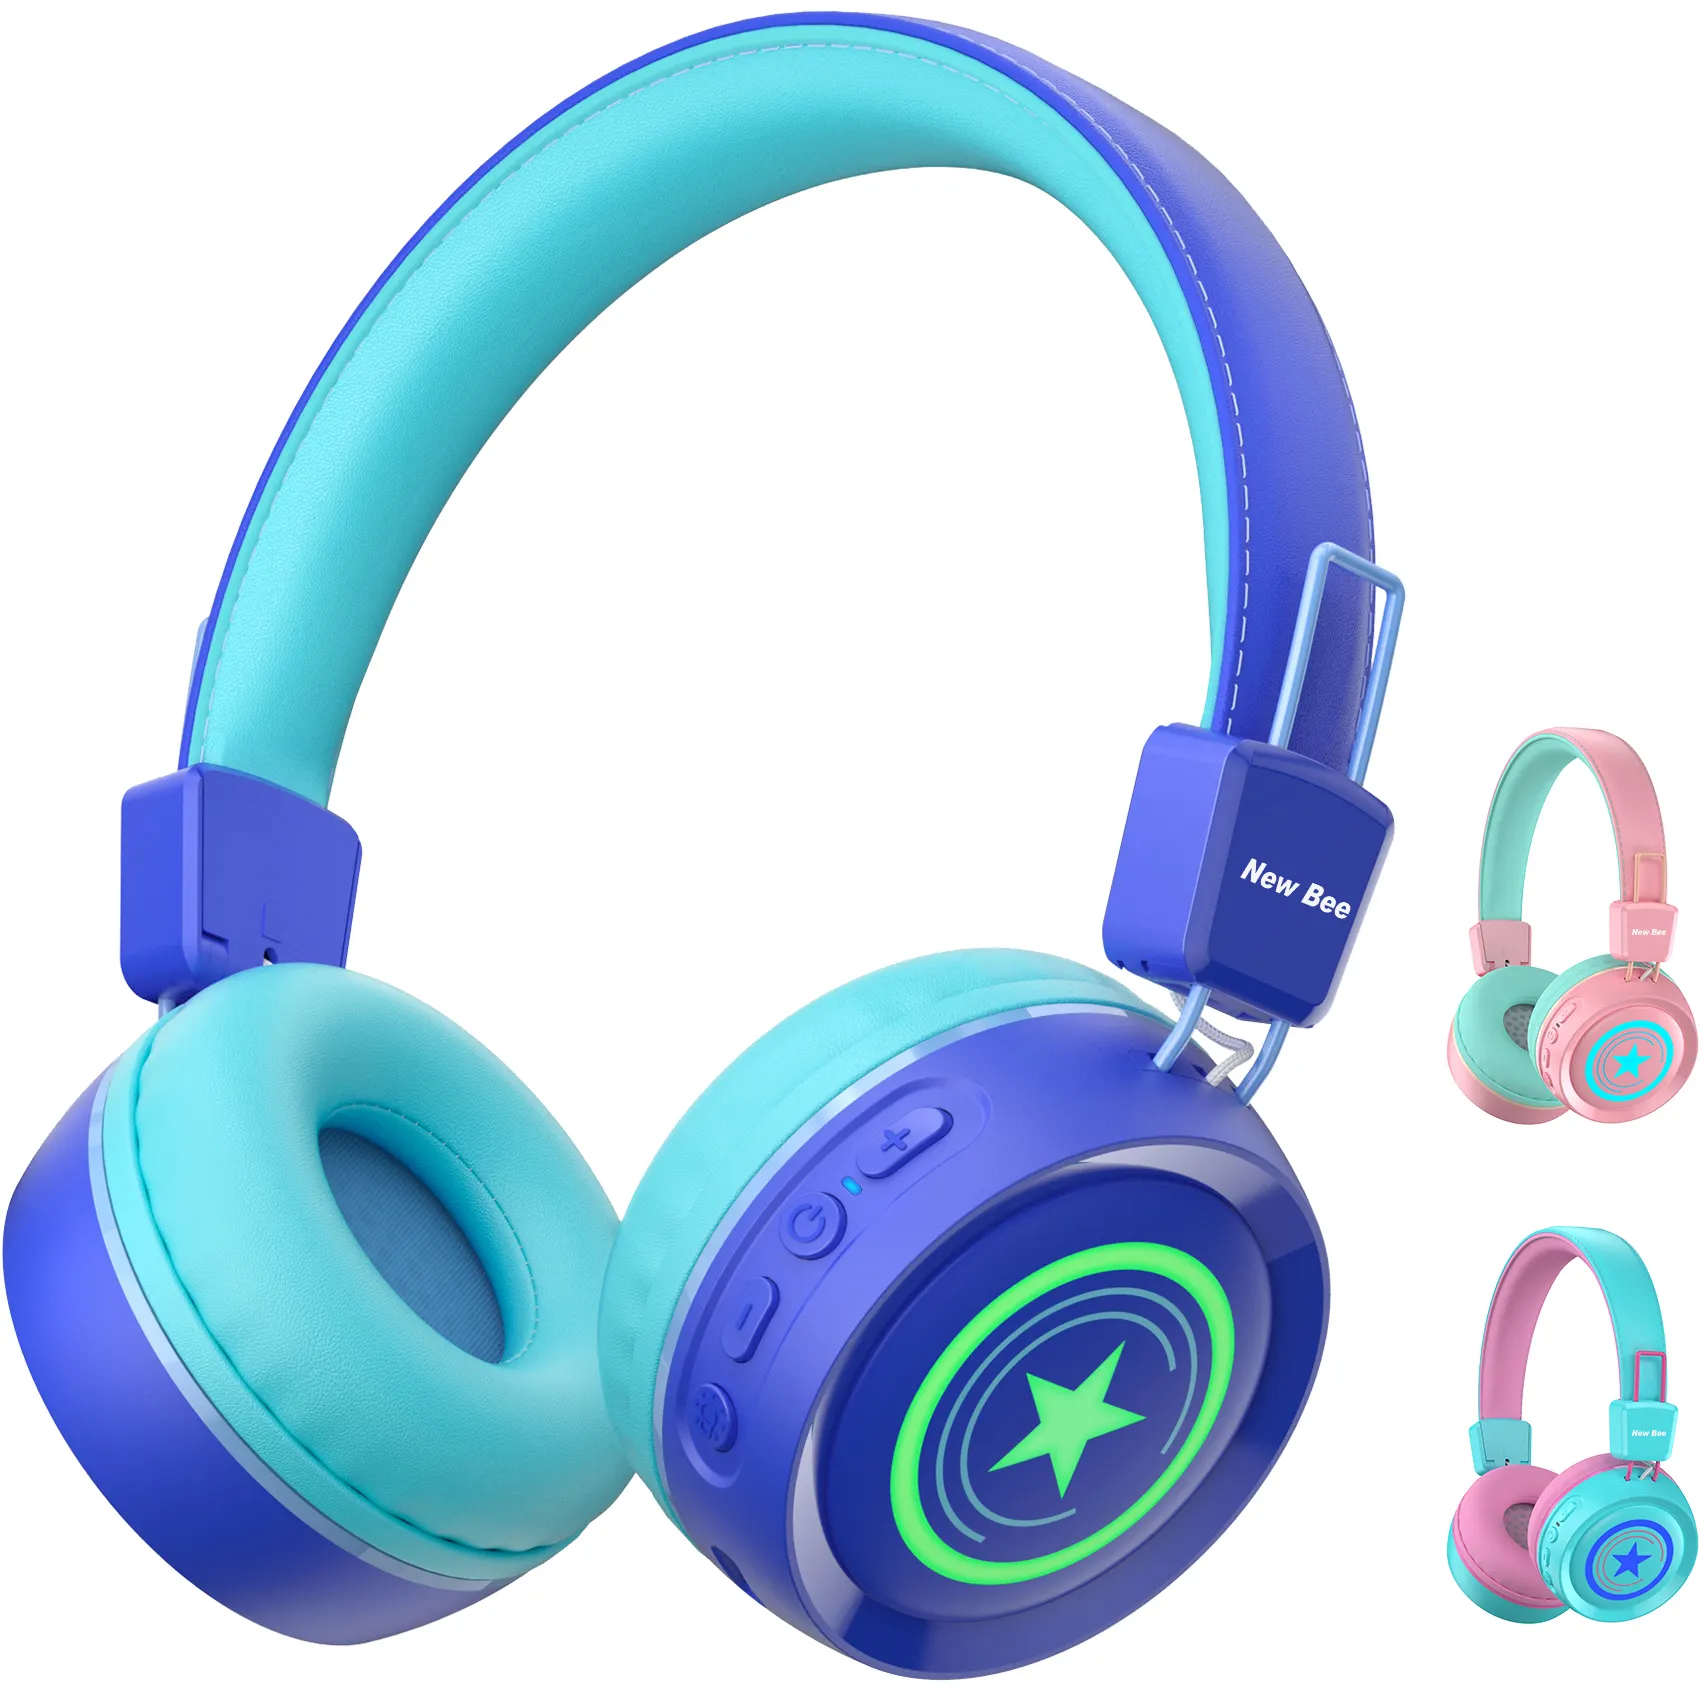 New Products New Bee Handsfree 5.0 Bluetooth Wireless Gaming Headset Children Headphones with Microphone